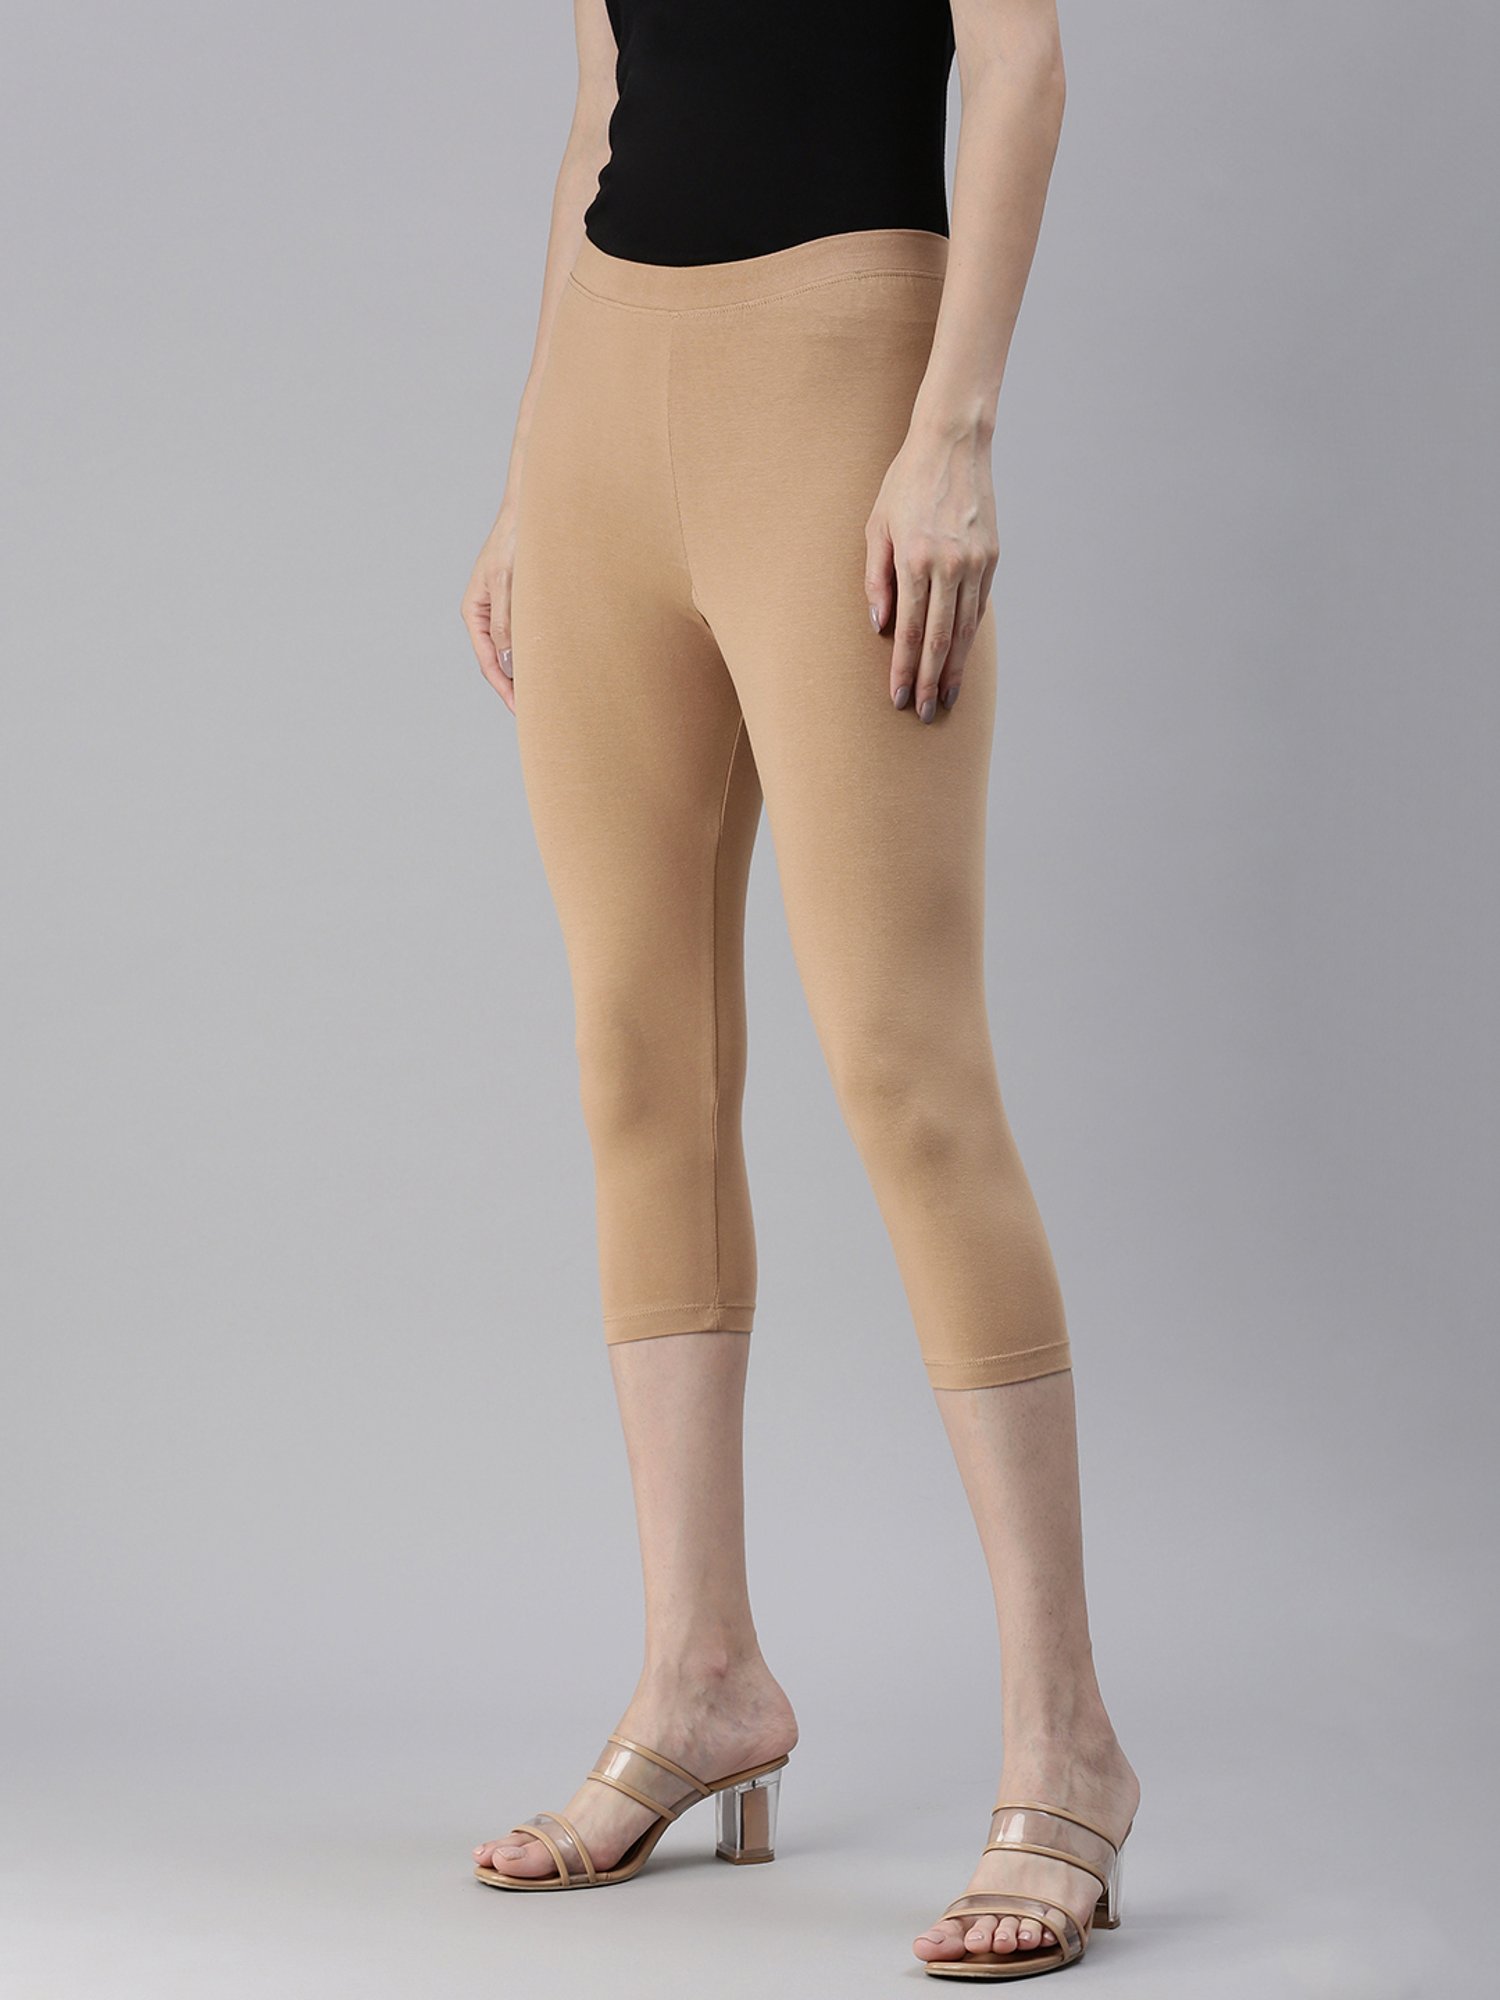 Buy GO COLORS Wheat Womens Solid Leggings | Shoppers Stop